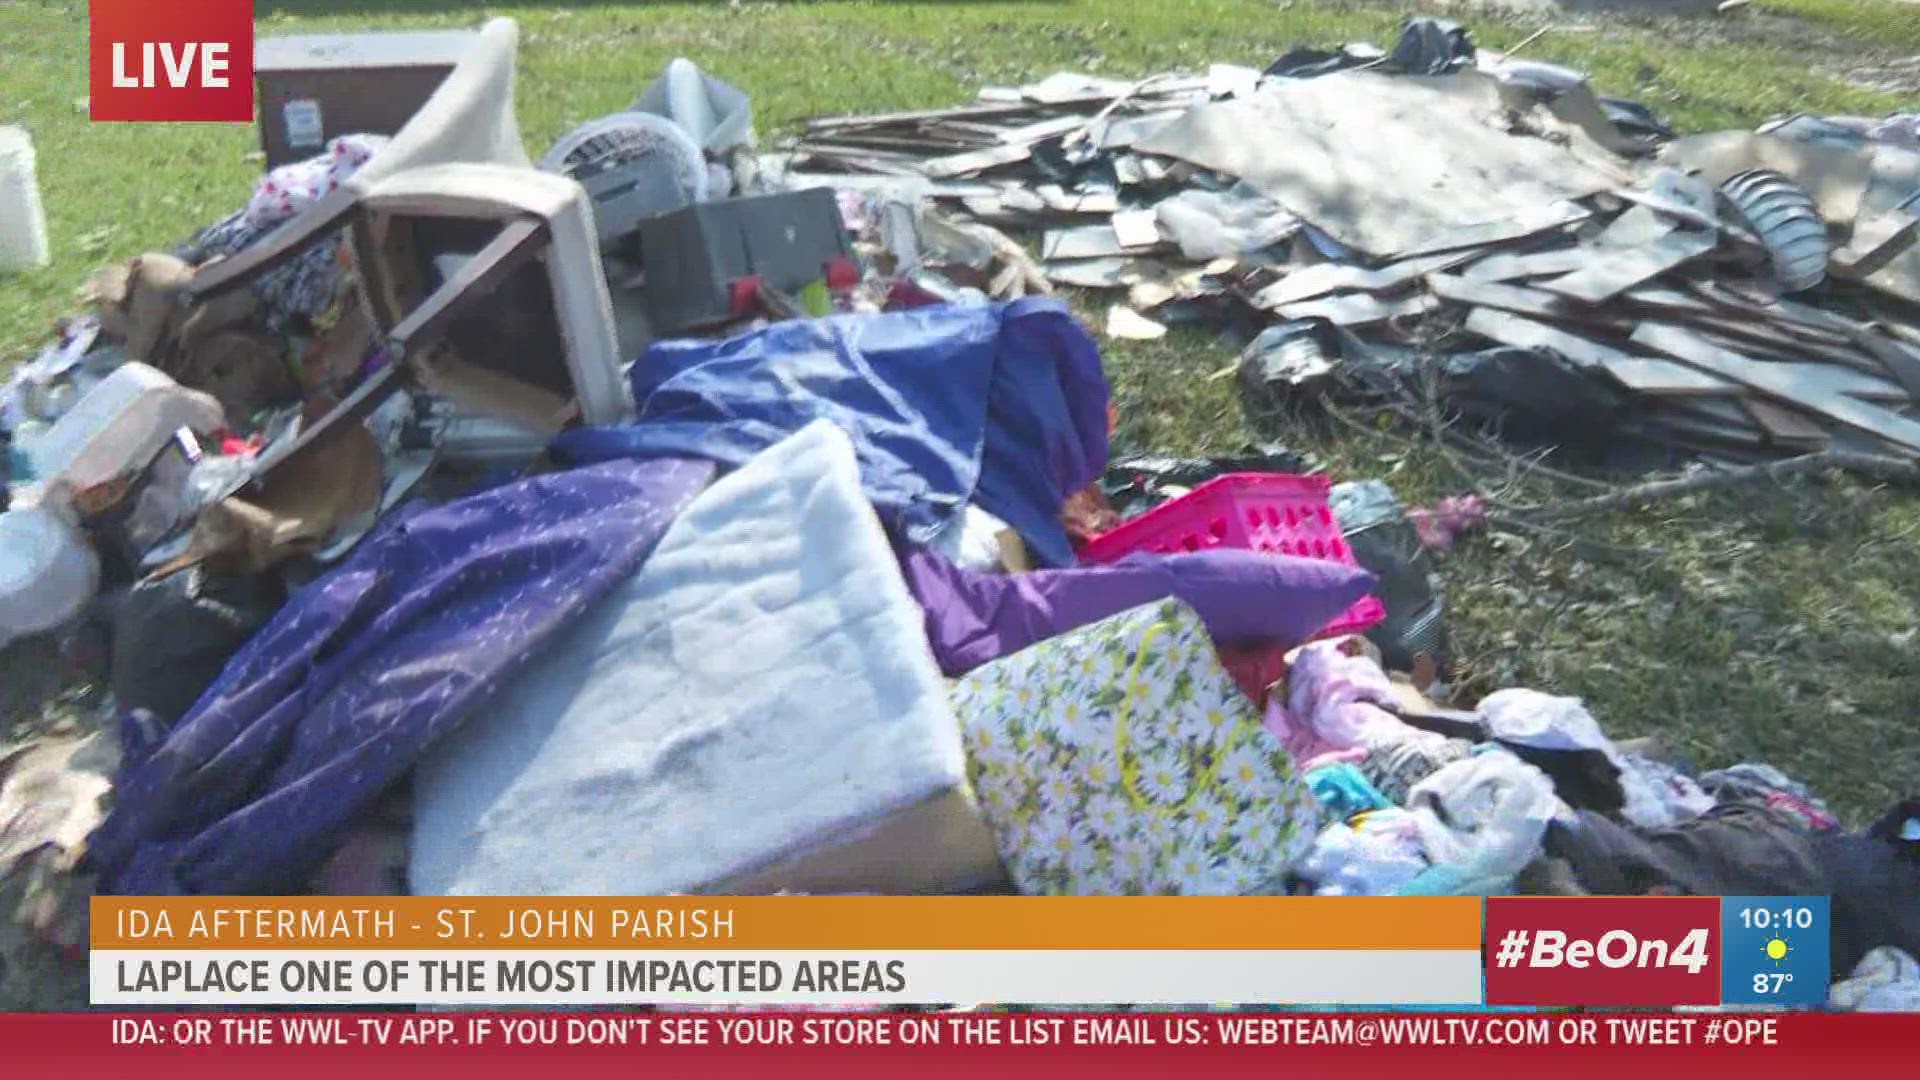 Residents in LaPlace, one of the hardest hit places by Hurricane Ida, are slowly beginning the process of removing belongings damaged by floodwaters.